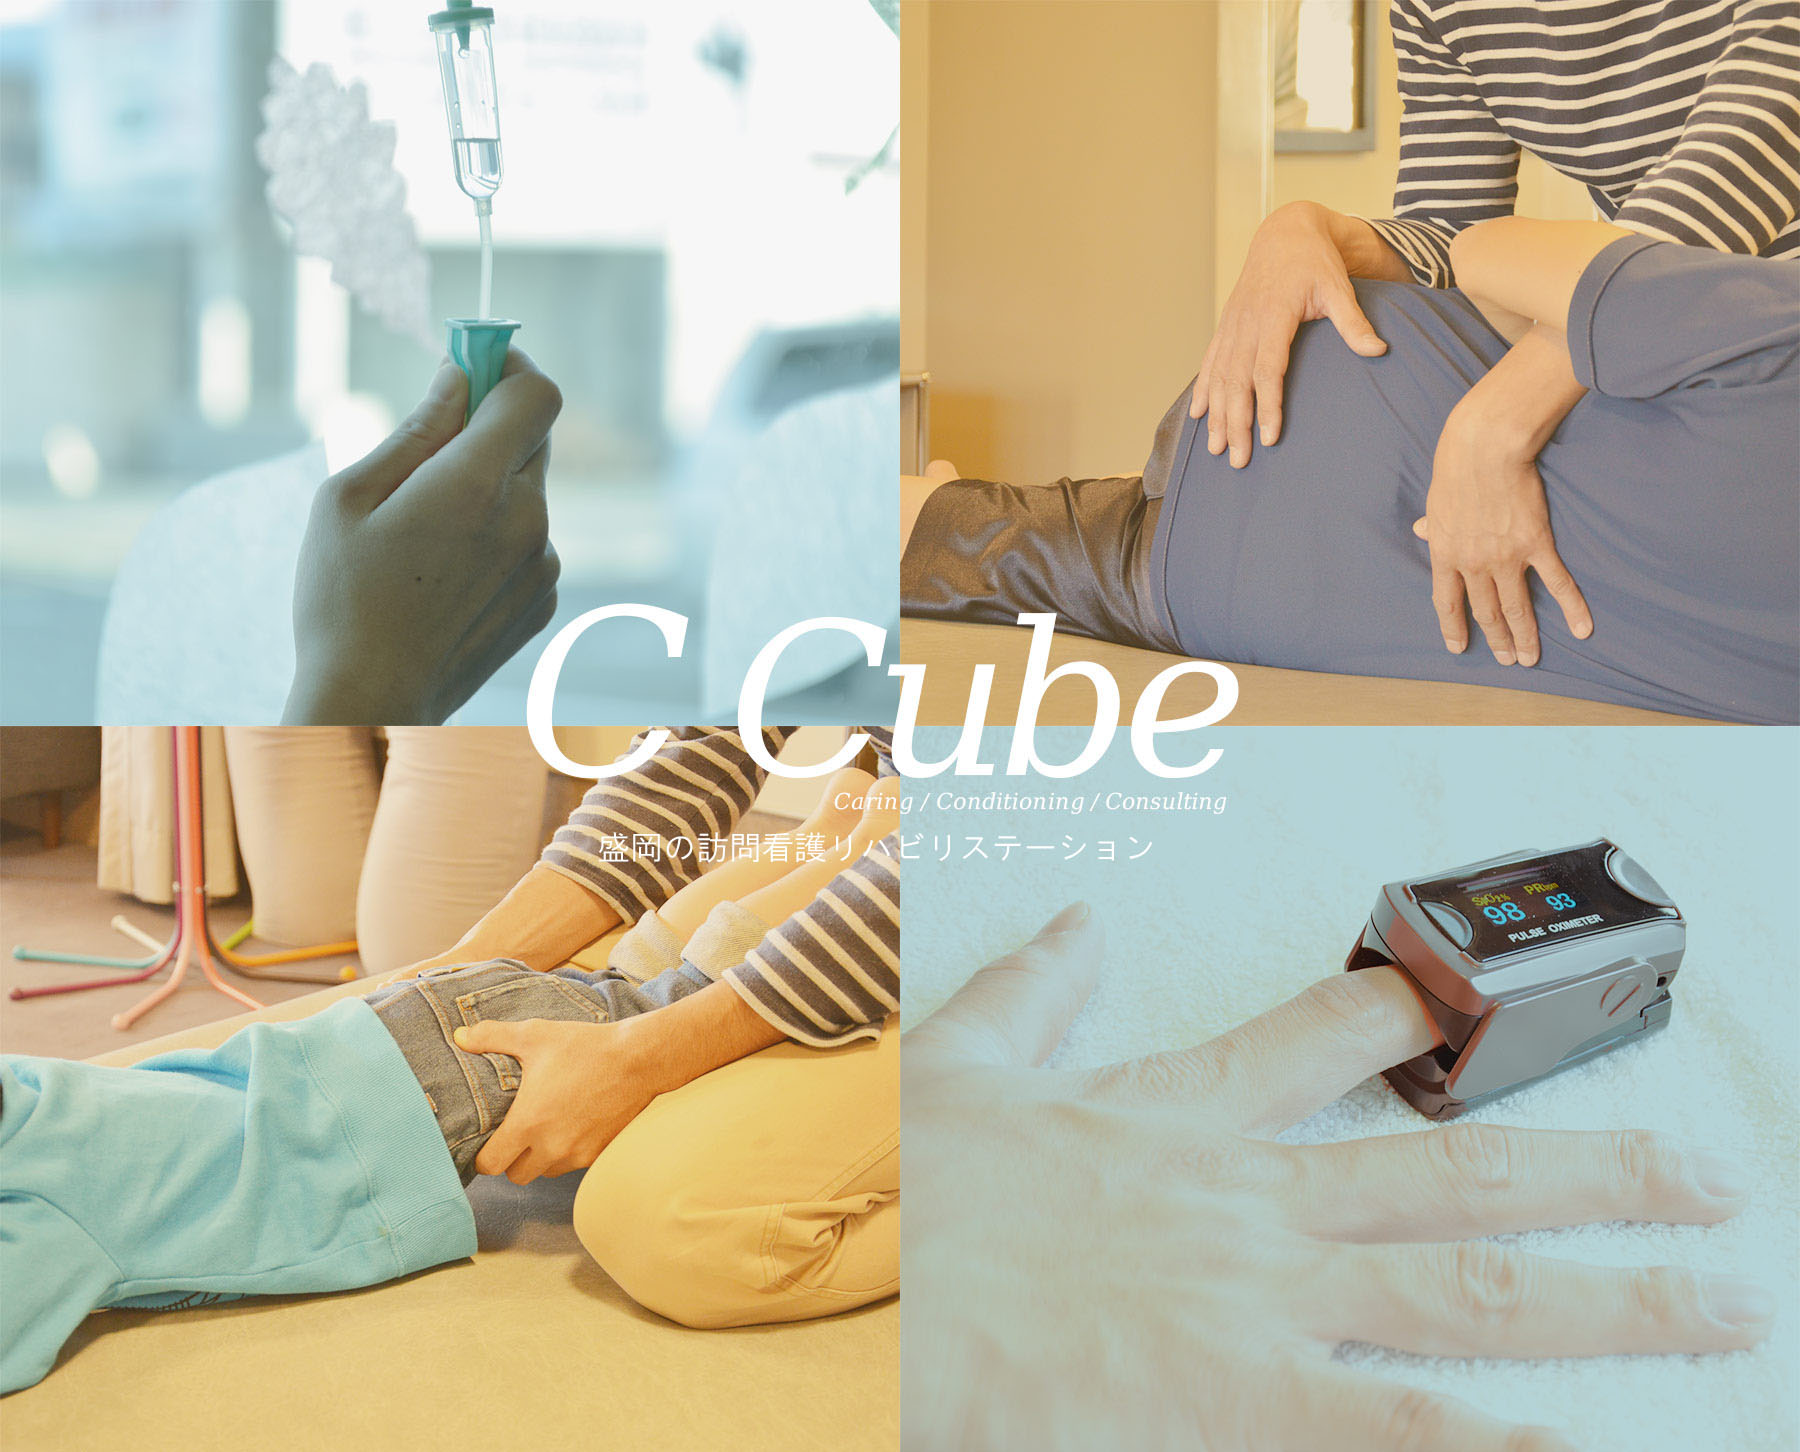 C Cube caring / Conditioning / Consulting 盛岡の訪問看護リハビリステーション